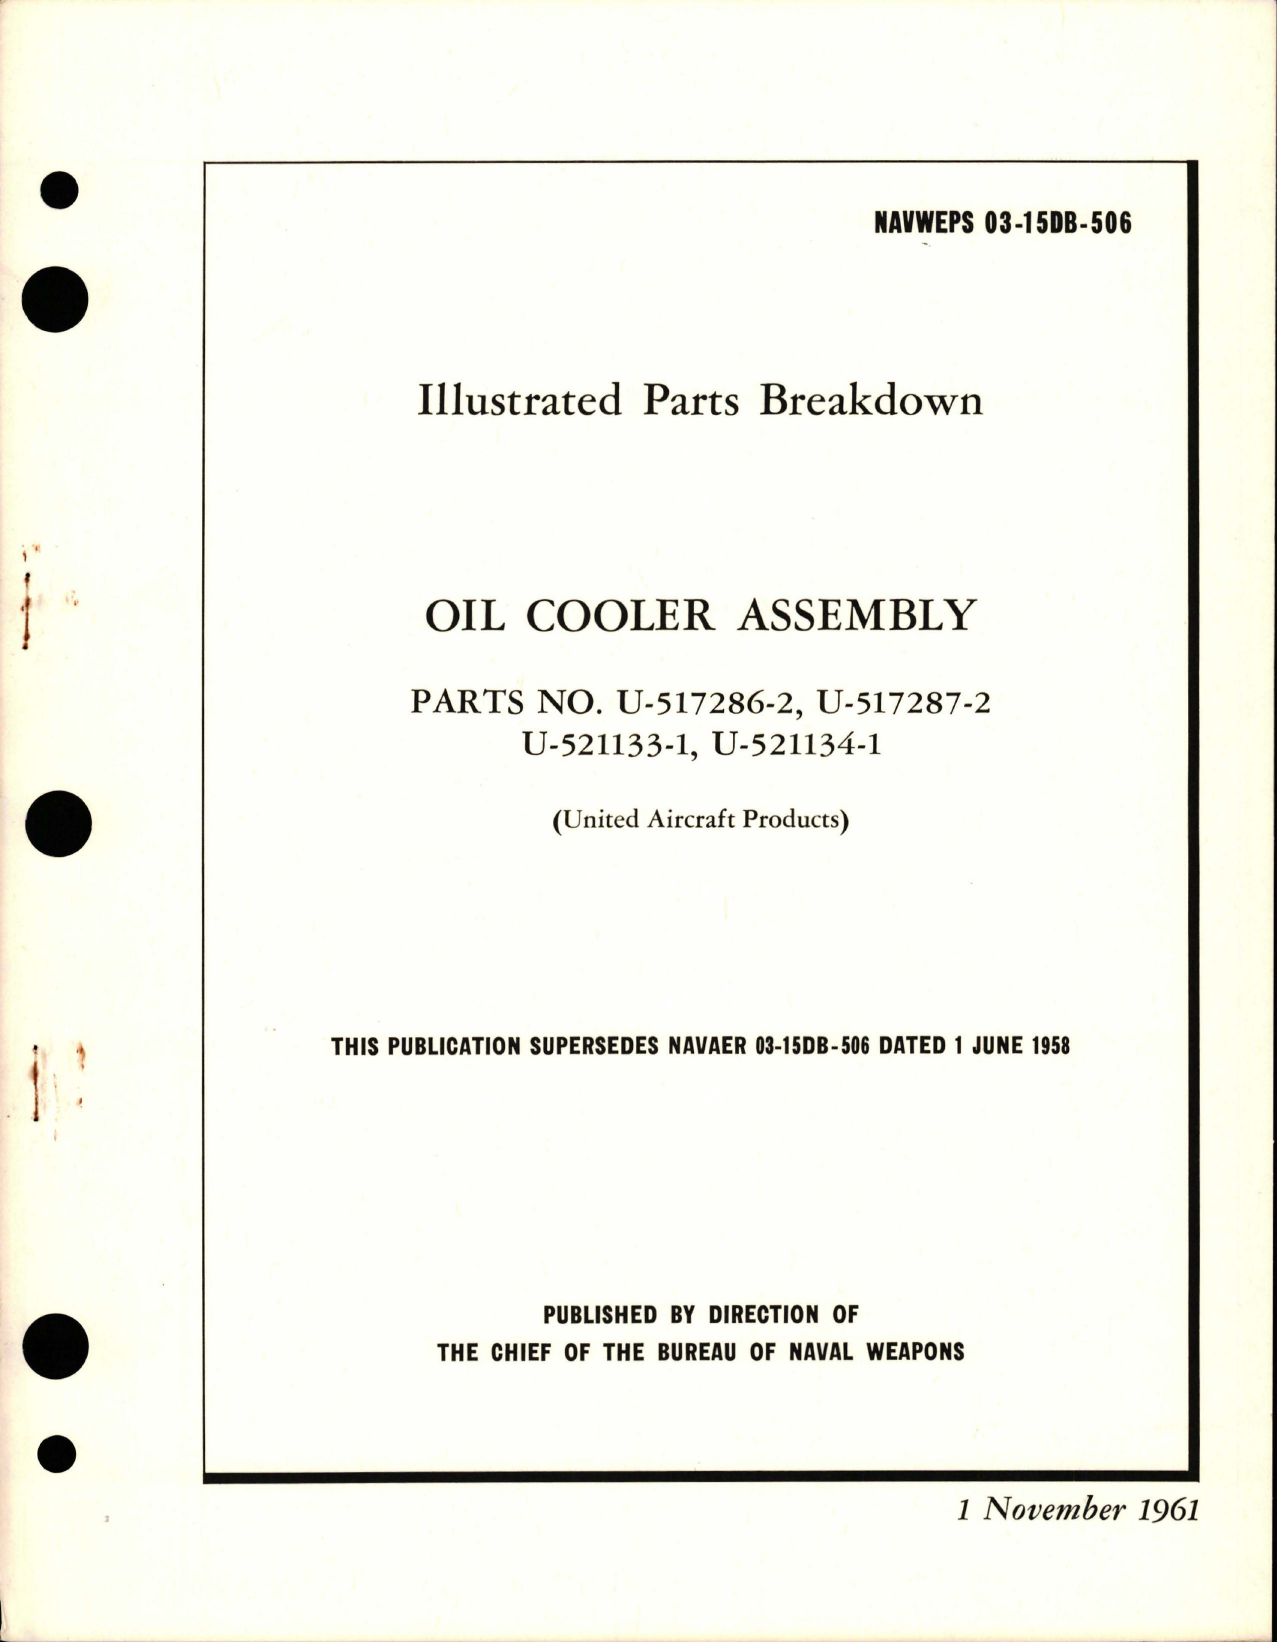 Sample page 1 from AirCorps Library document: Illustrated Parts Breakdown for Oil Cooler Assembly - Parts U-517286-2, U-517287-2, U-521133-1, and U-521134-1